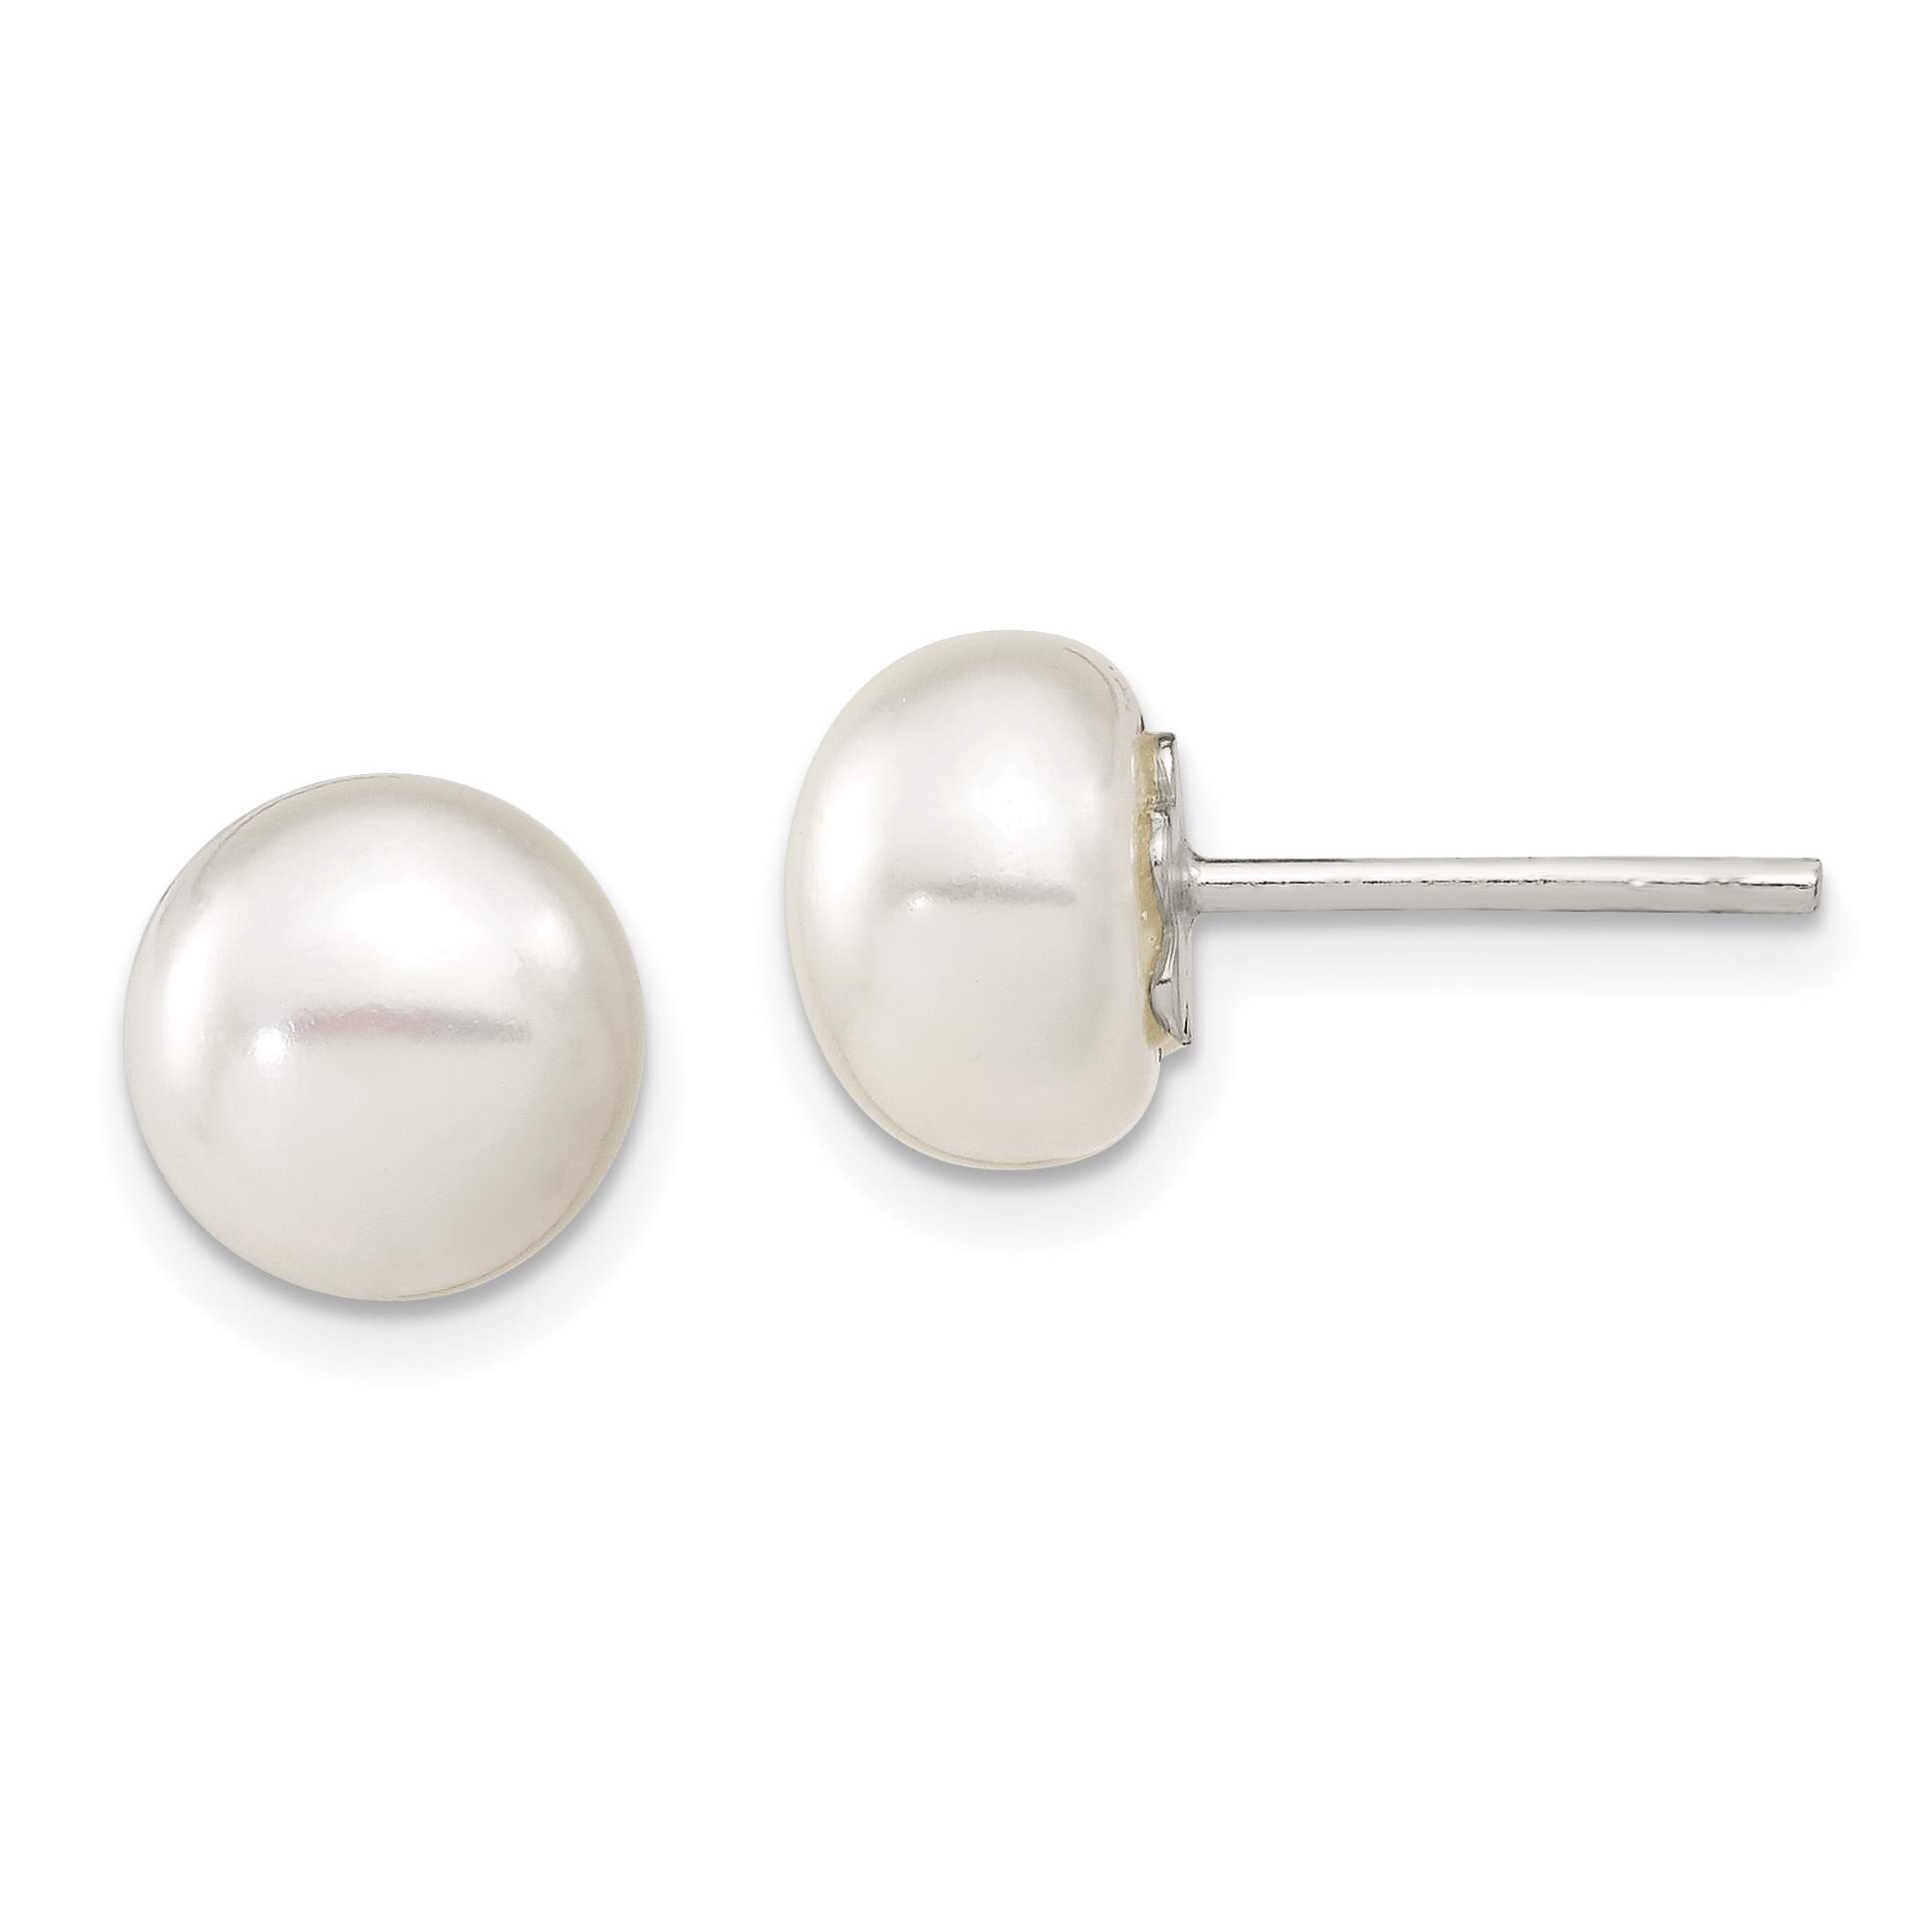 Solid 925 Sterling Silver White FW Cultured Pearl 7-8mm Button Earrings 